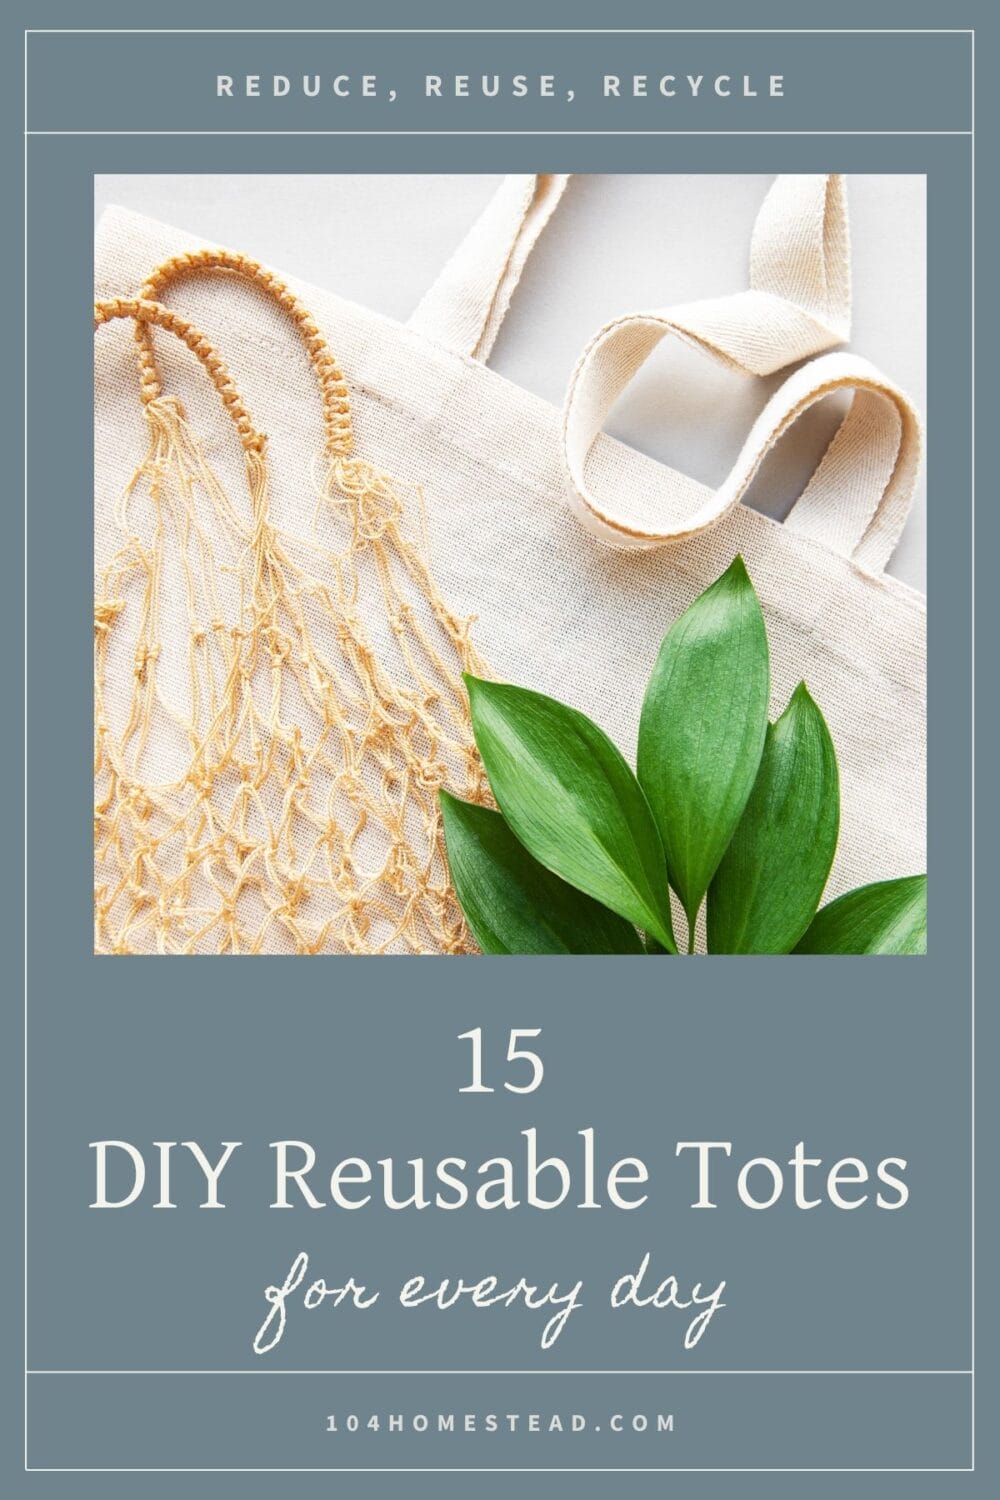 A Pinterest-friendly graphic for my post on making your own reusable grocery bags and totes.